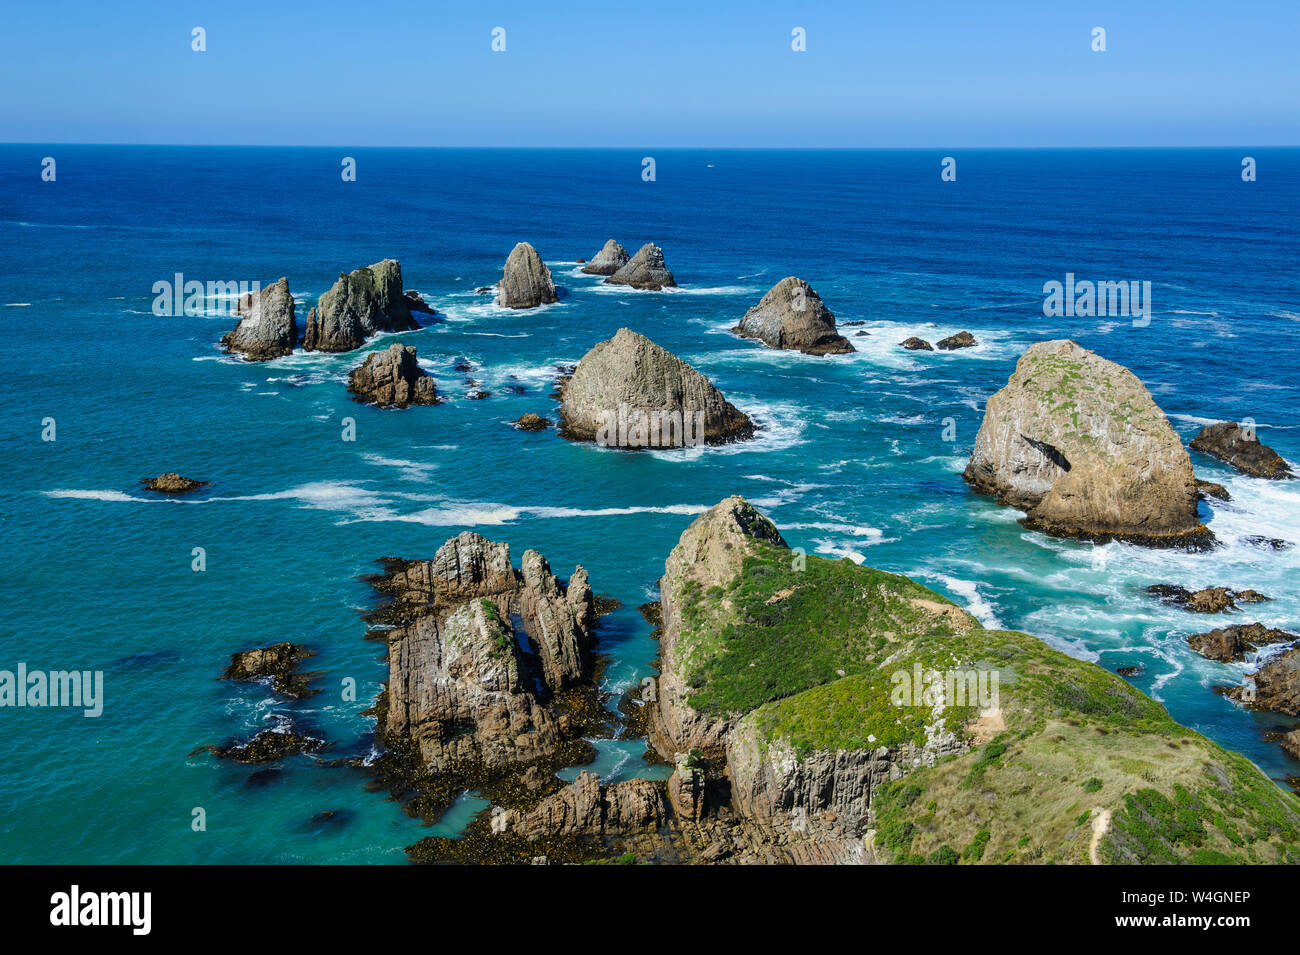 View from the Nugget Point Lighthouse in the turquoise waters with huge rocks, The Catlins, South Island, New Zealand Stock Photo